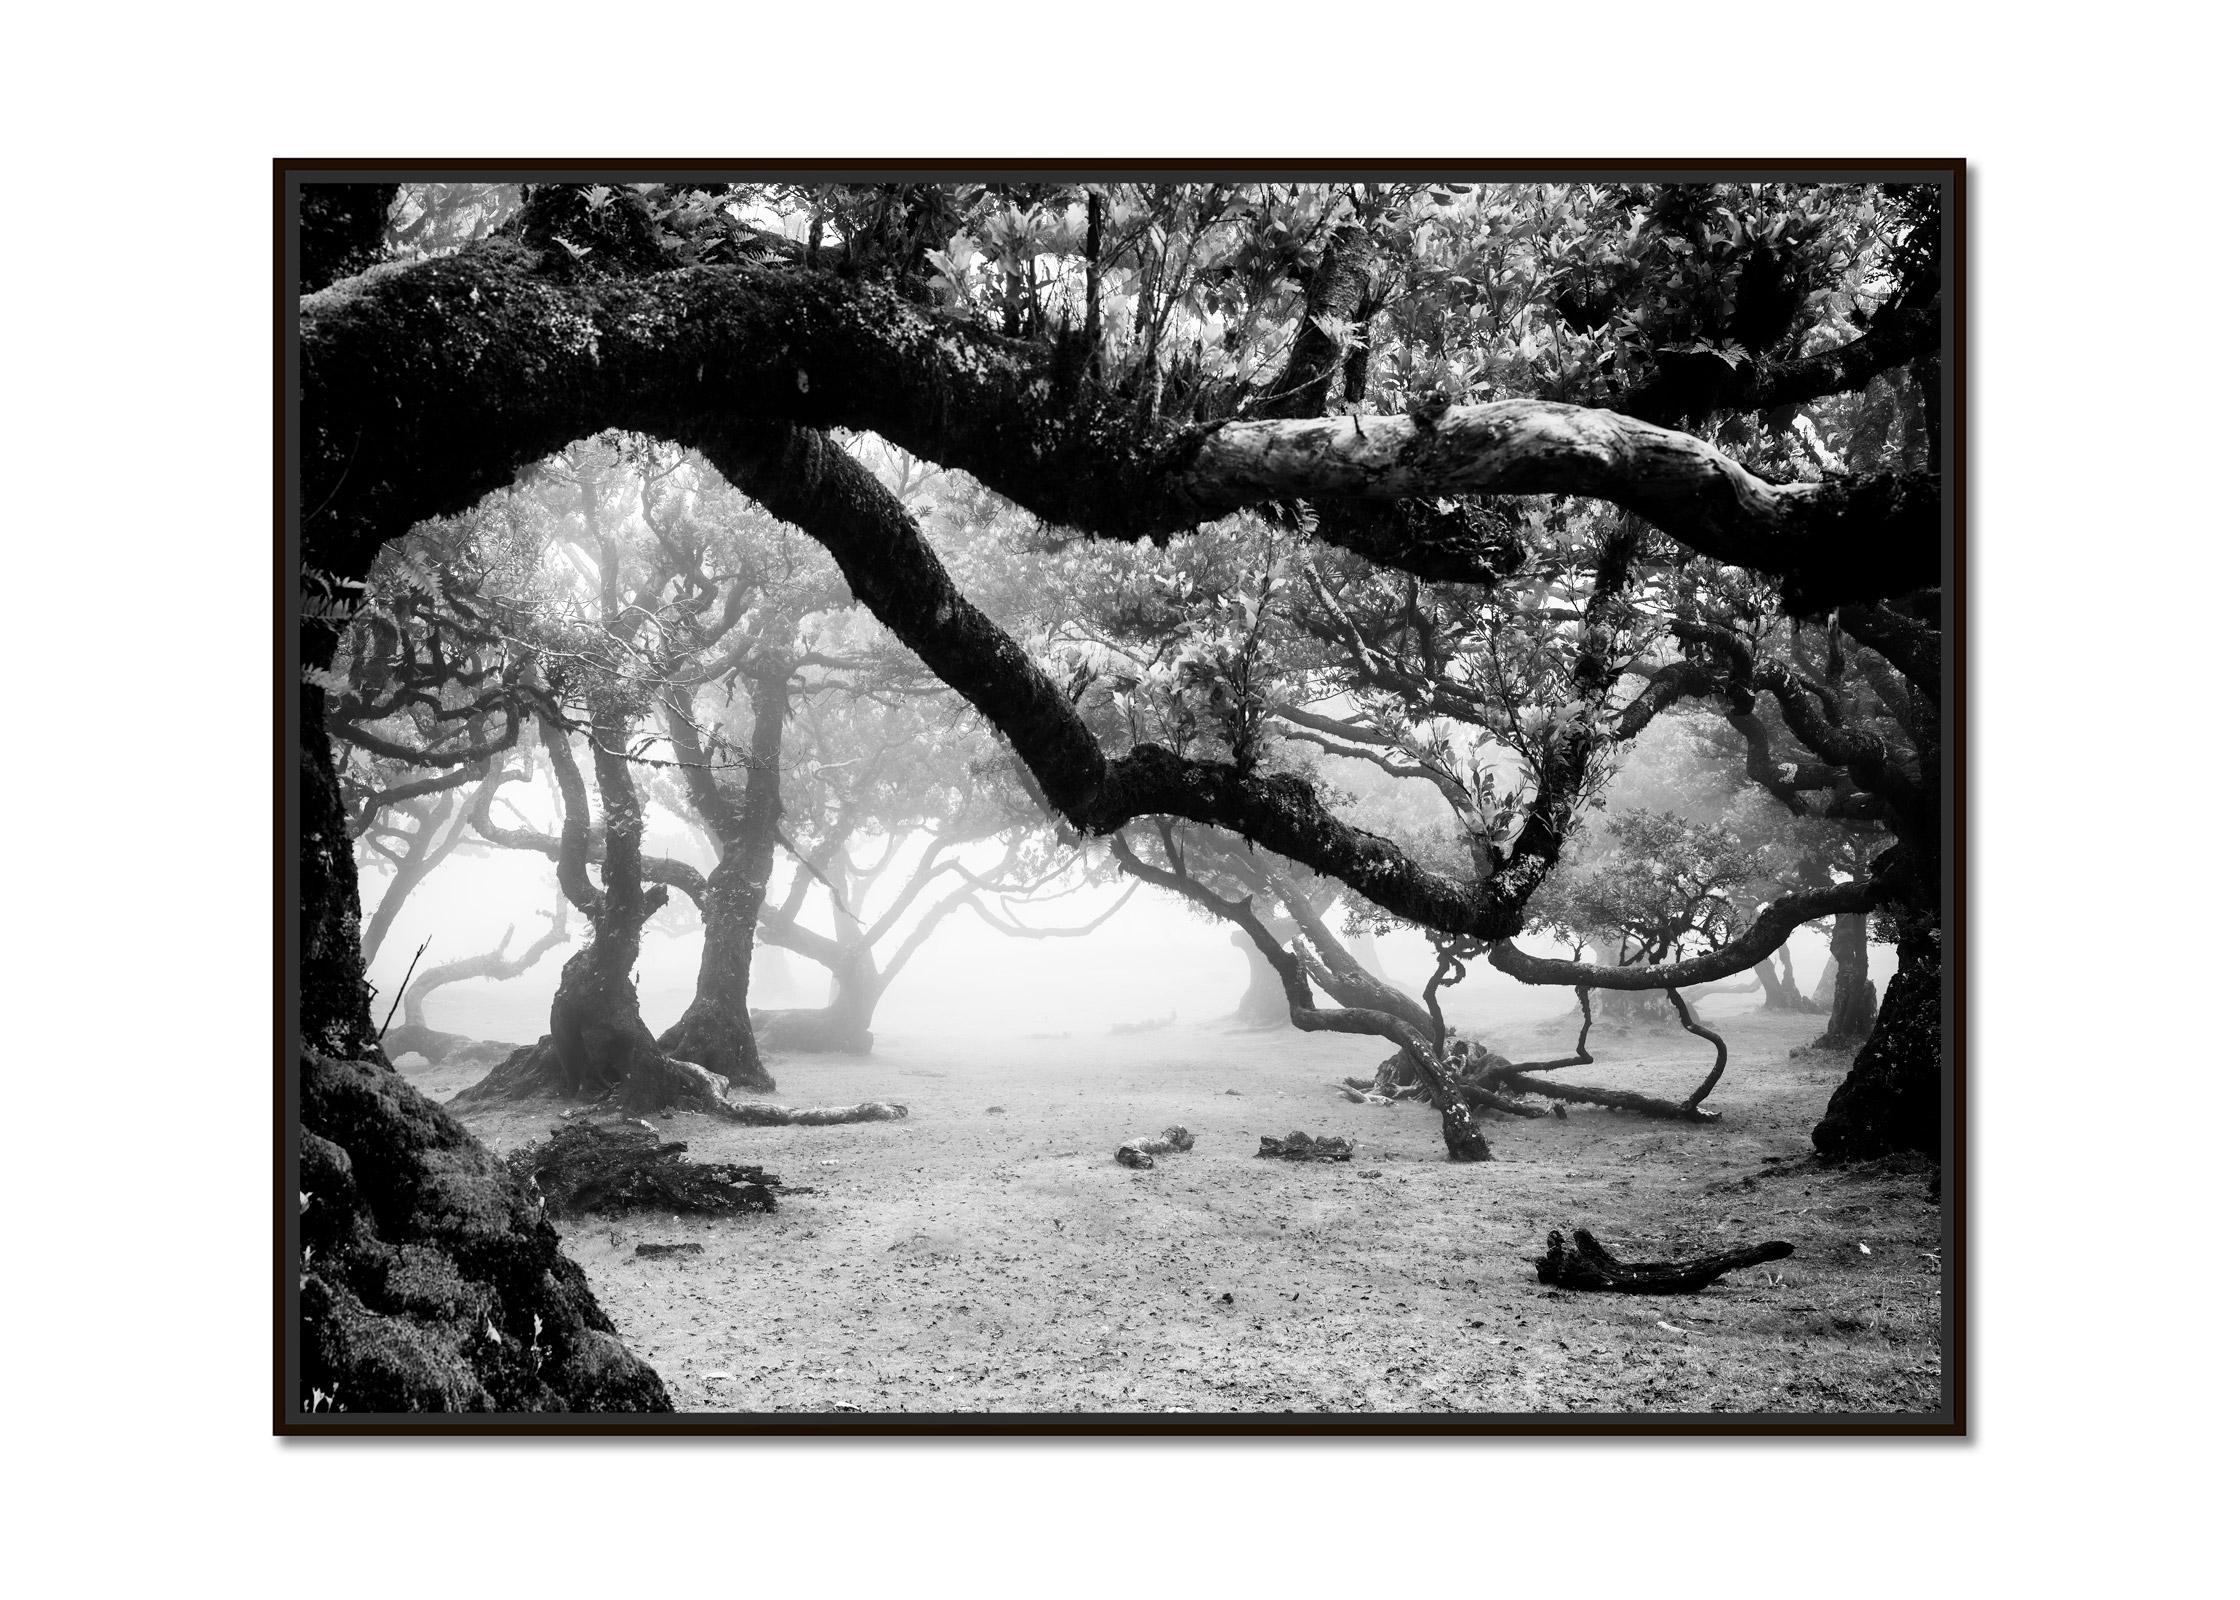 Ancient Laurisilva Forest, magical trees, black and white landscape photography - Photograph by Gerald Berghammer